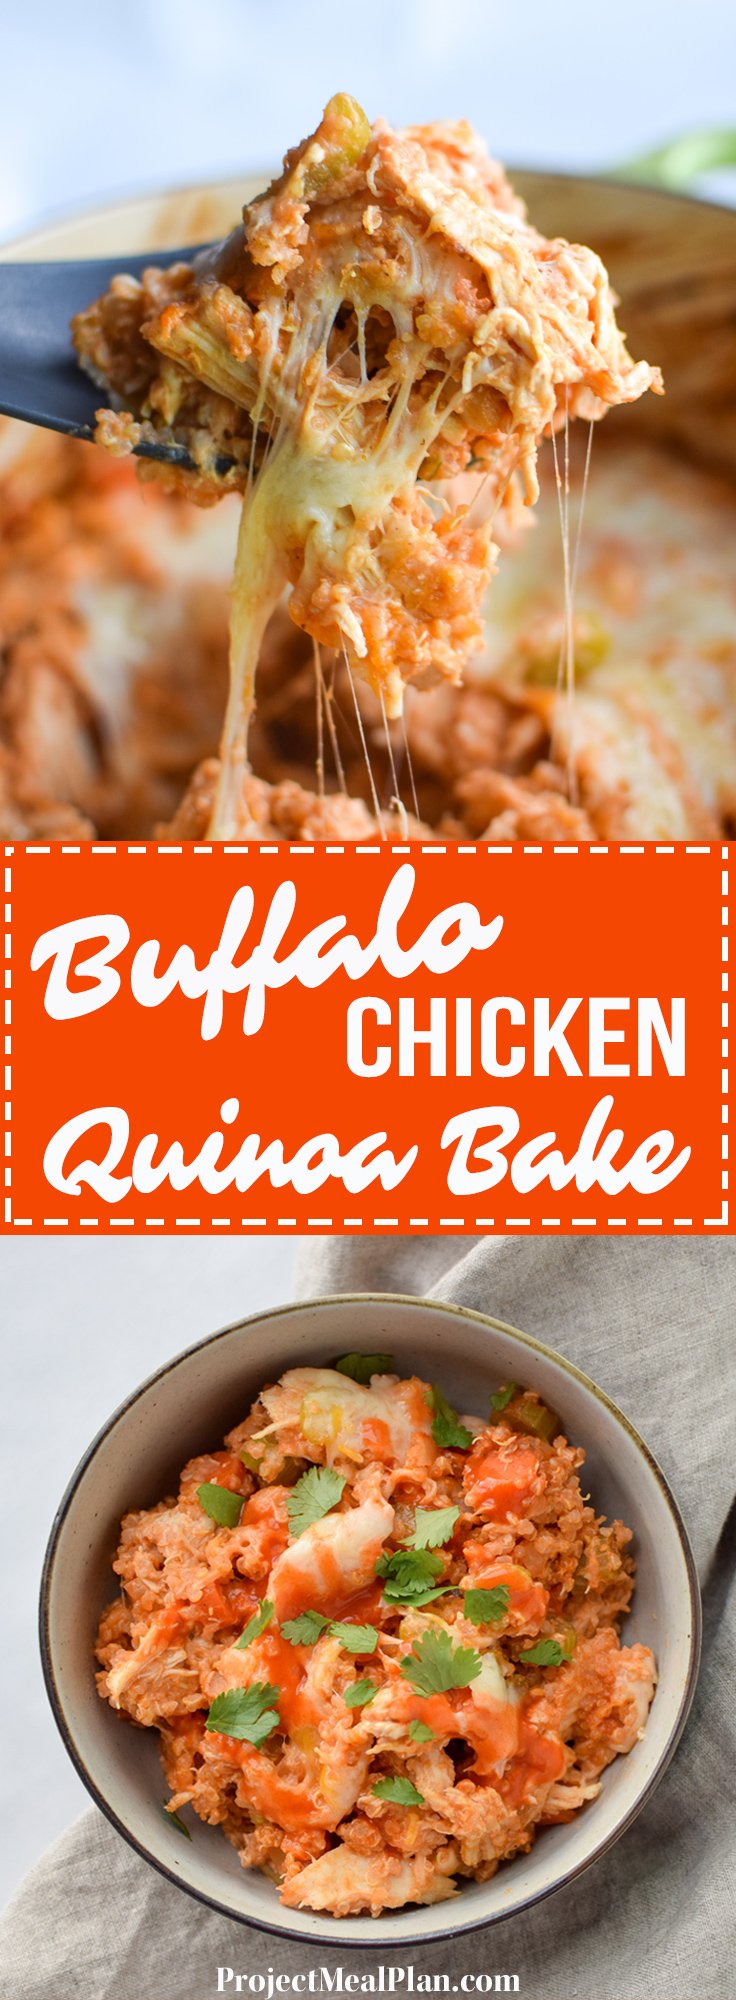 Buffalo Chicken Quinoa Bake recipe - All the best flavors of buffalo chicken, baked to perfection with veggies and quinoa! - ProjectMealPlan.com